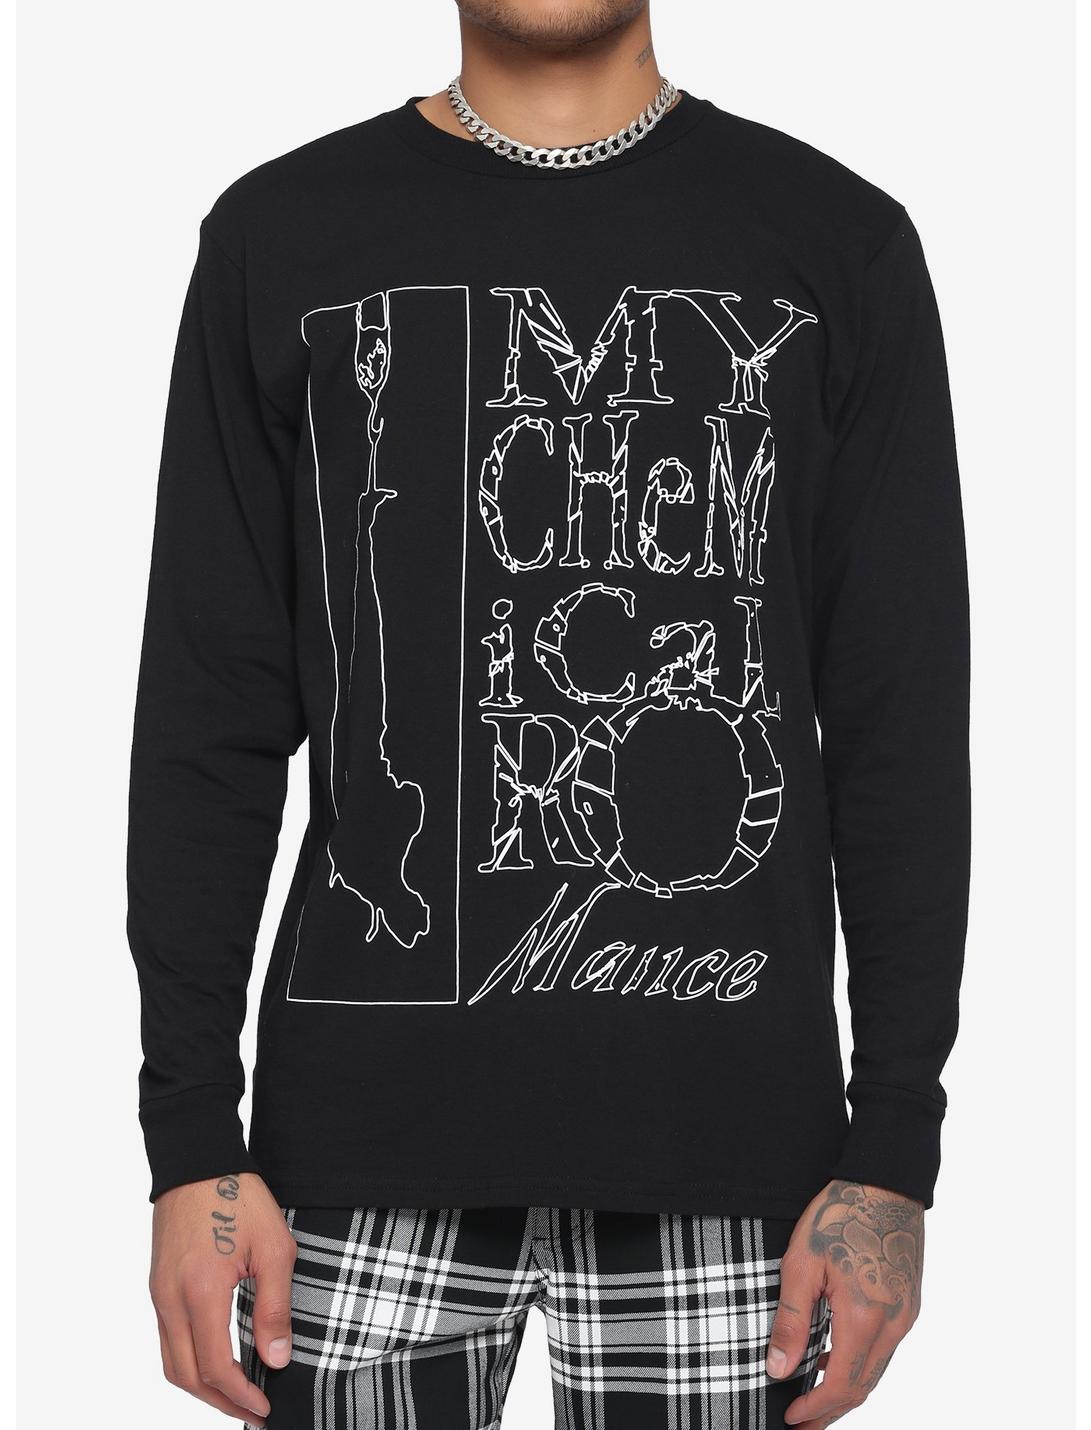 My Chemical Romance I Brought You My Bullets, You Brought Me Your Love Long-Sleeve T-Shirt, BLACK, hi-res